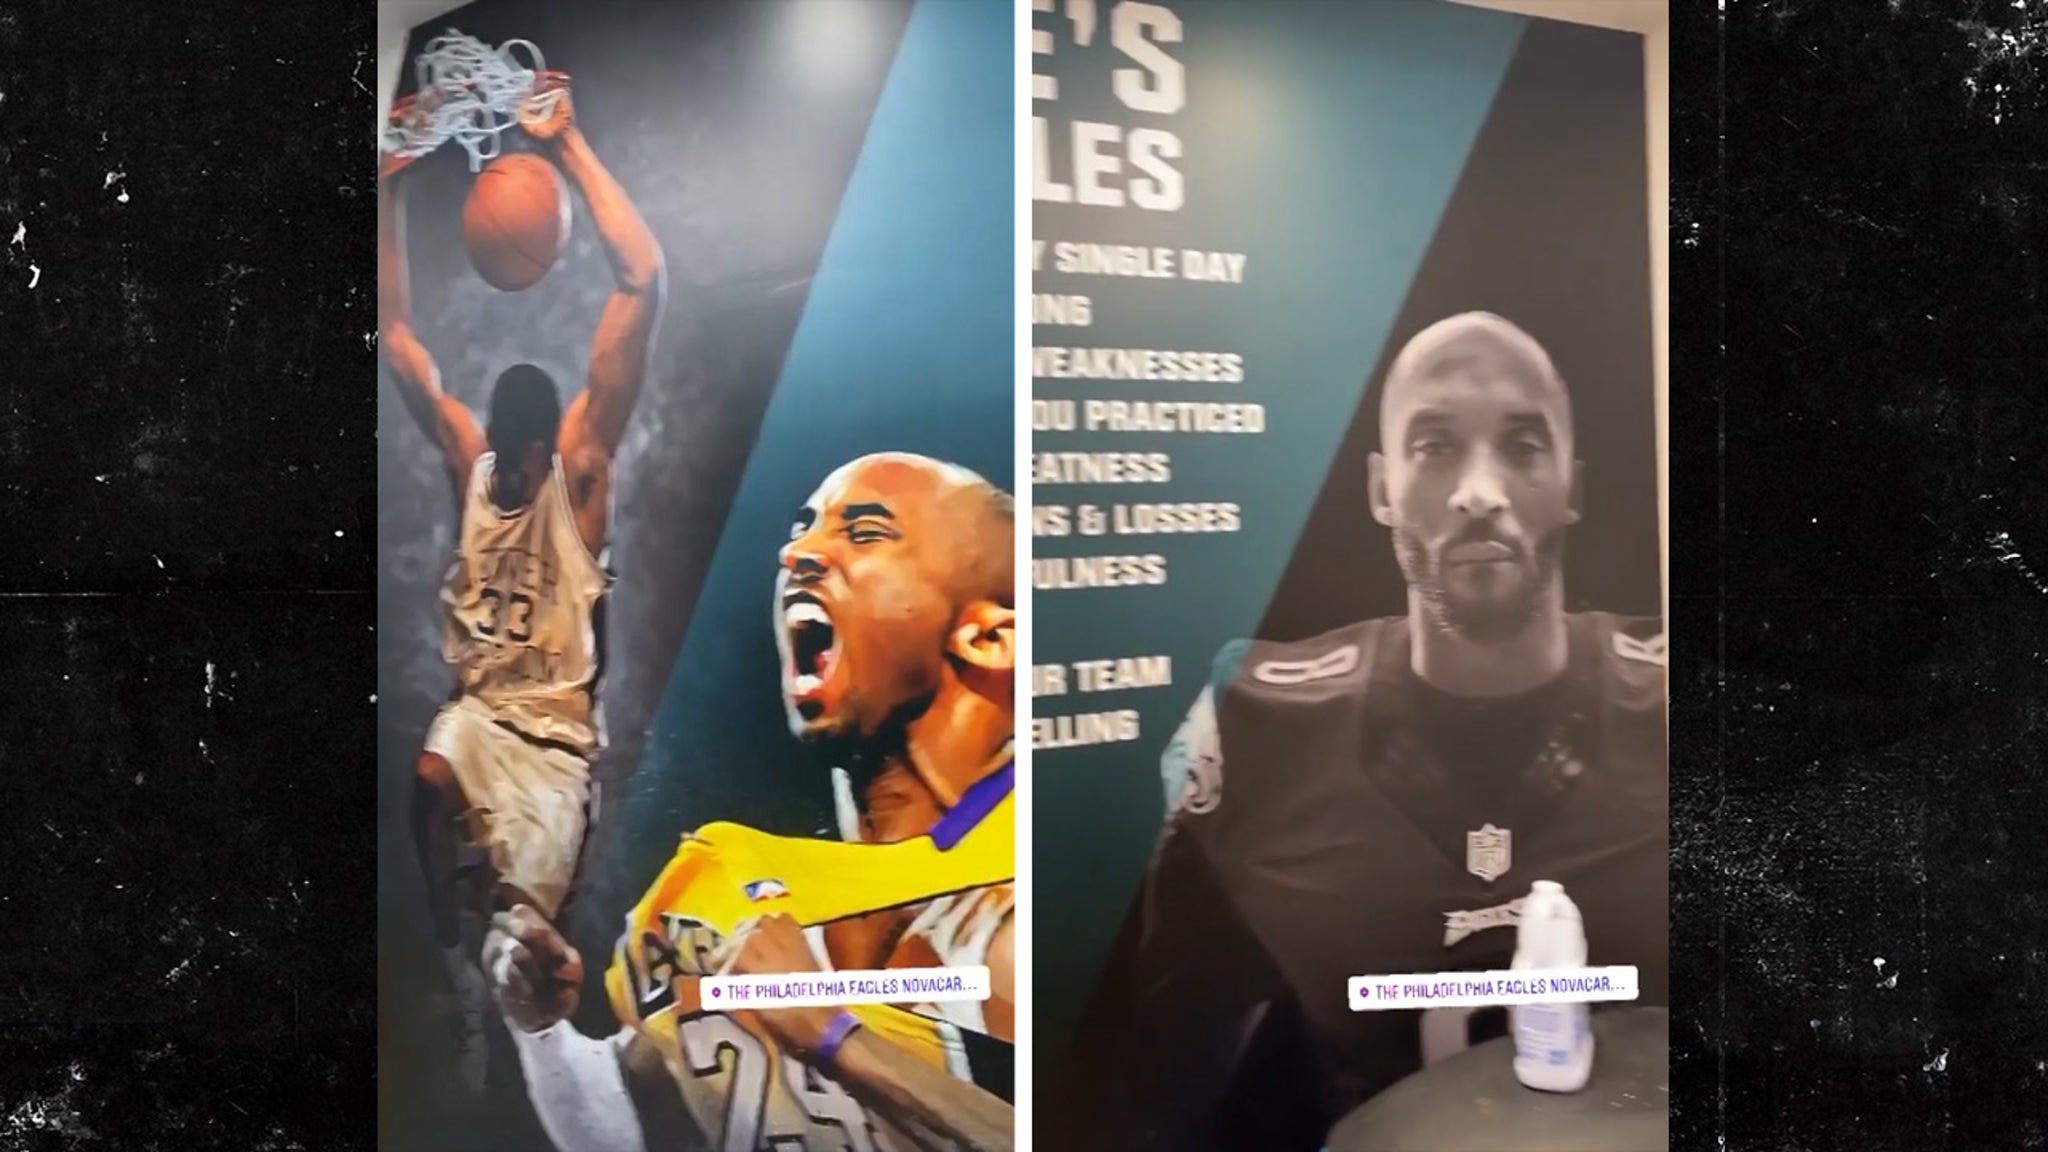 Eagles players pay tribute to Kobe Bryant - Bleeding Green Nation